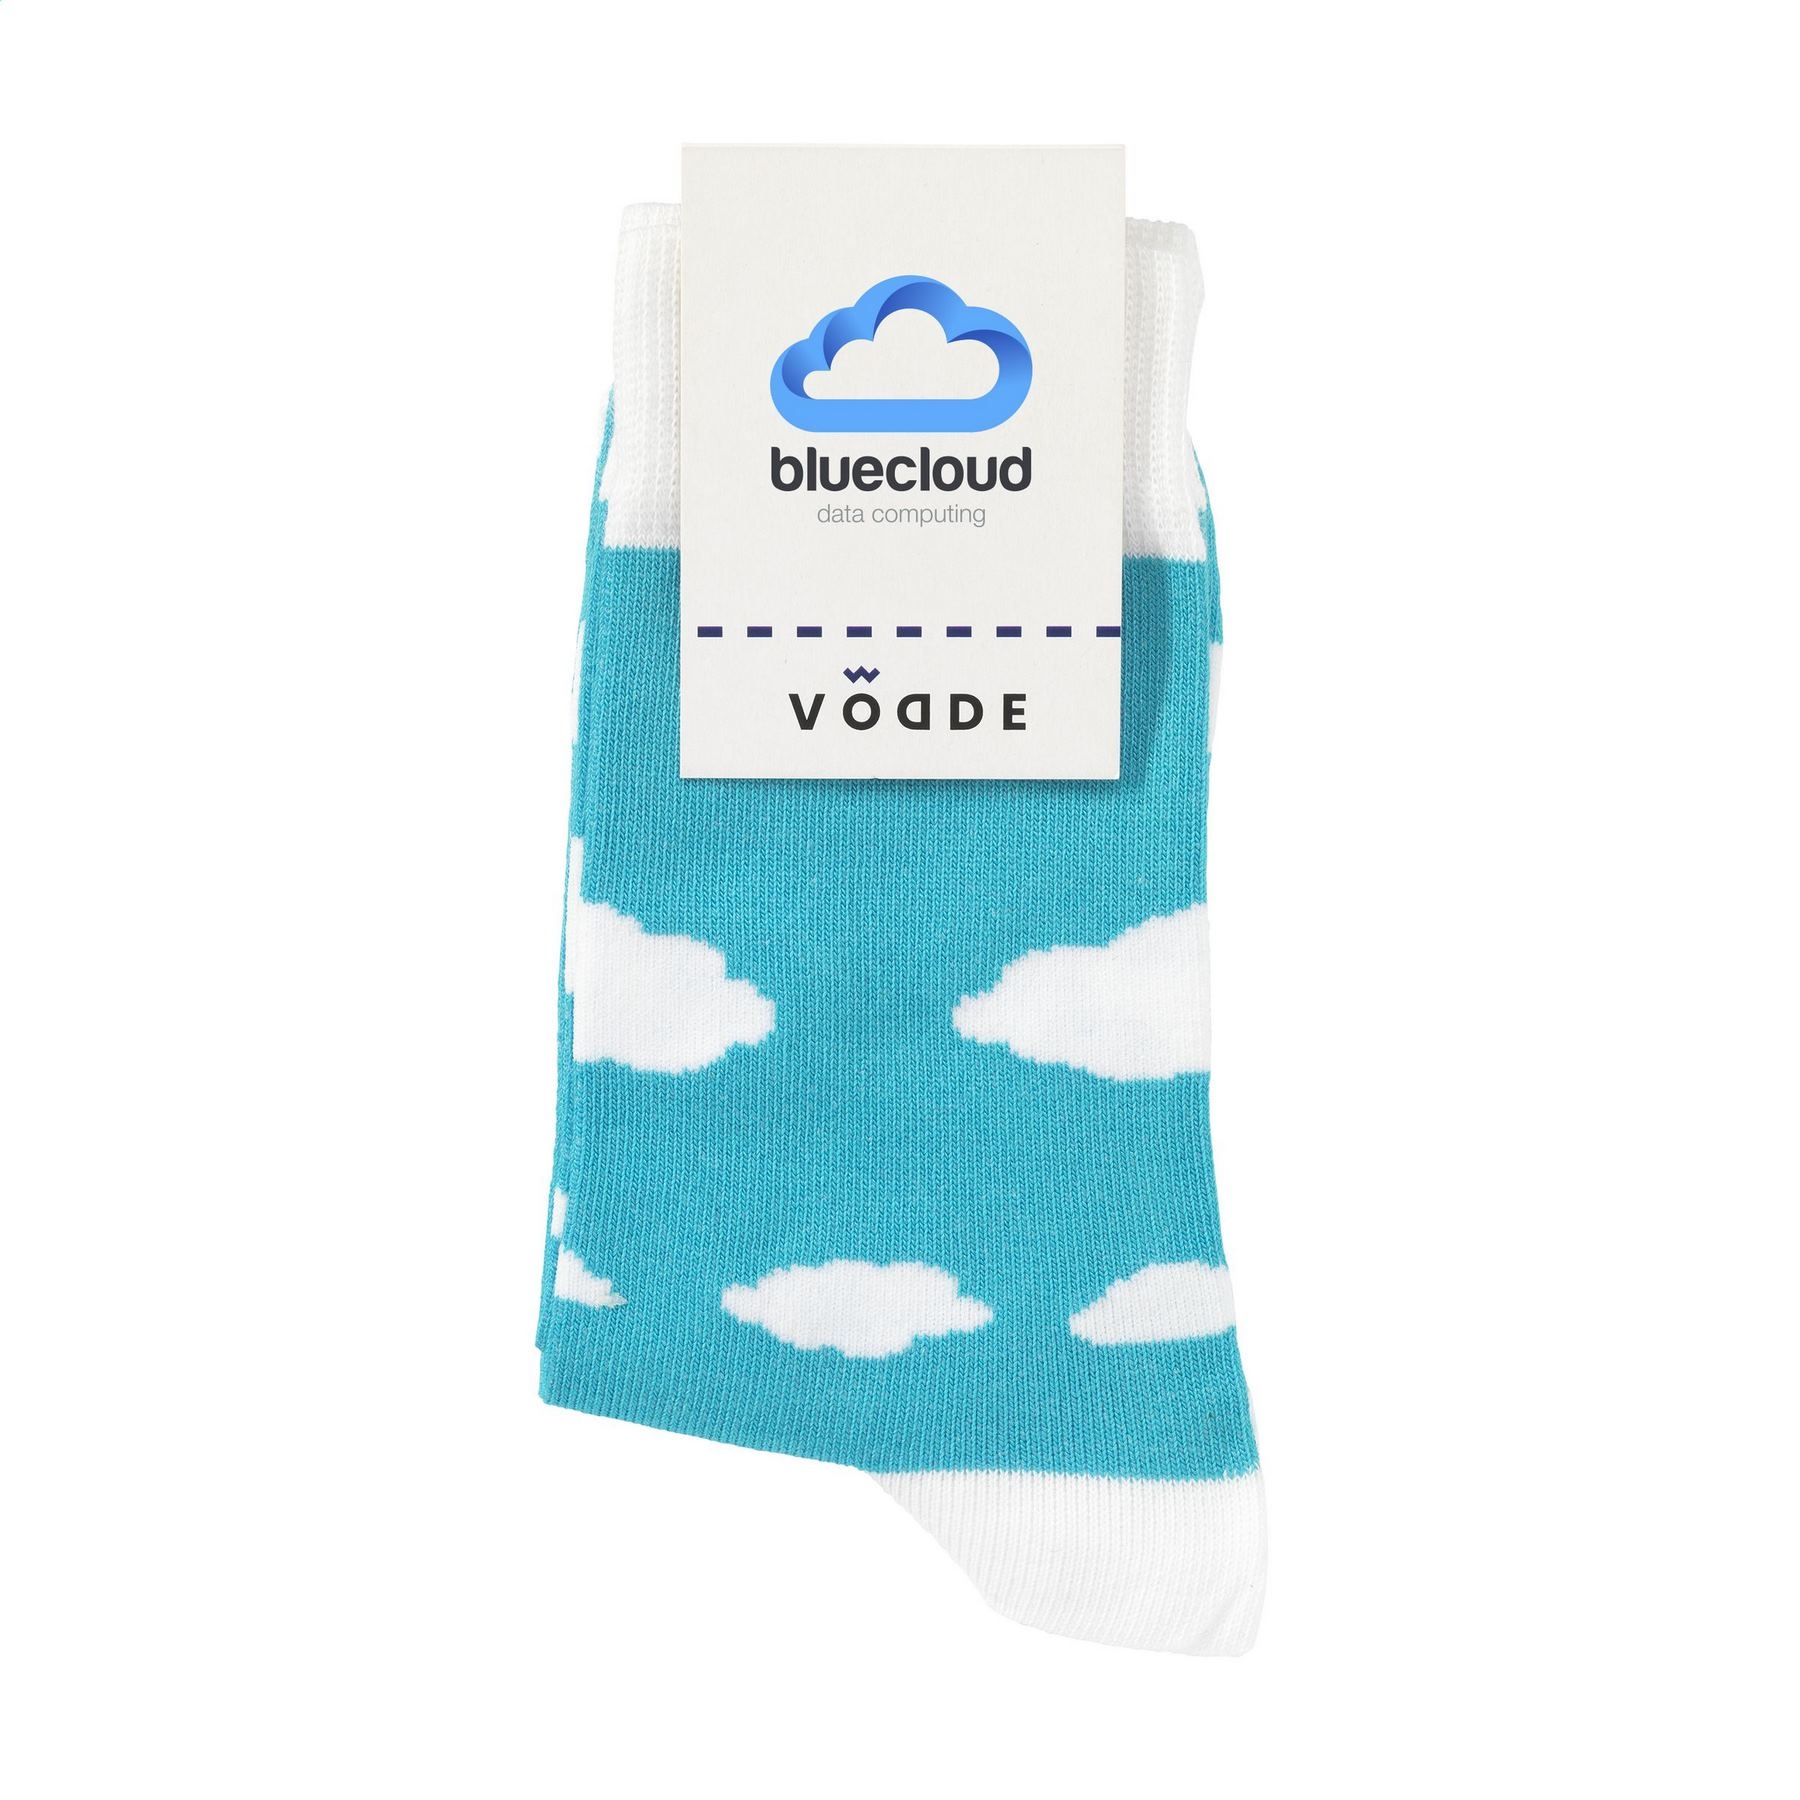 Vodde Recycled Casual Socks chaussettes